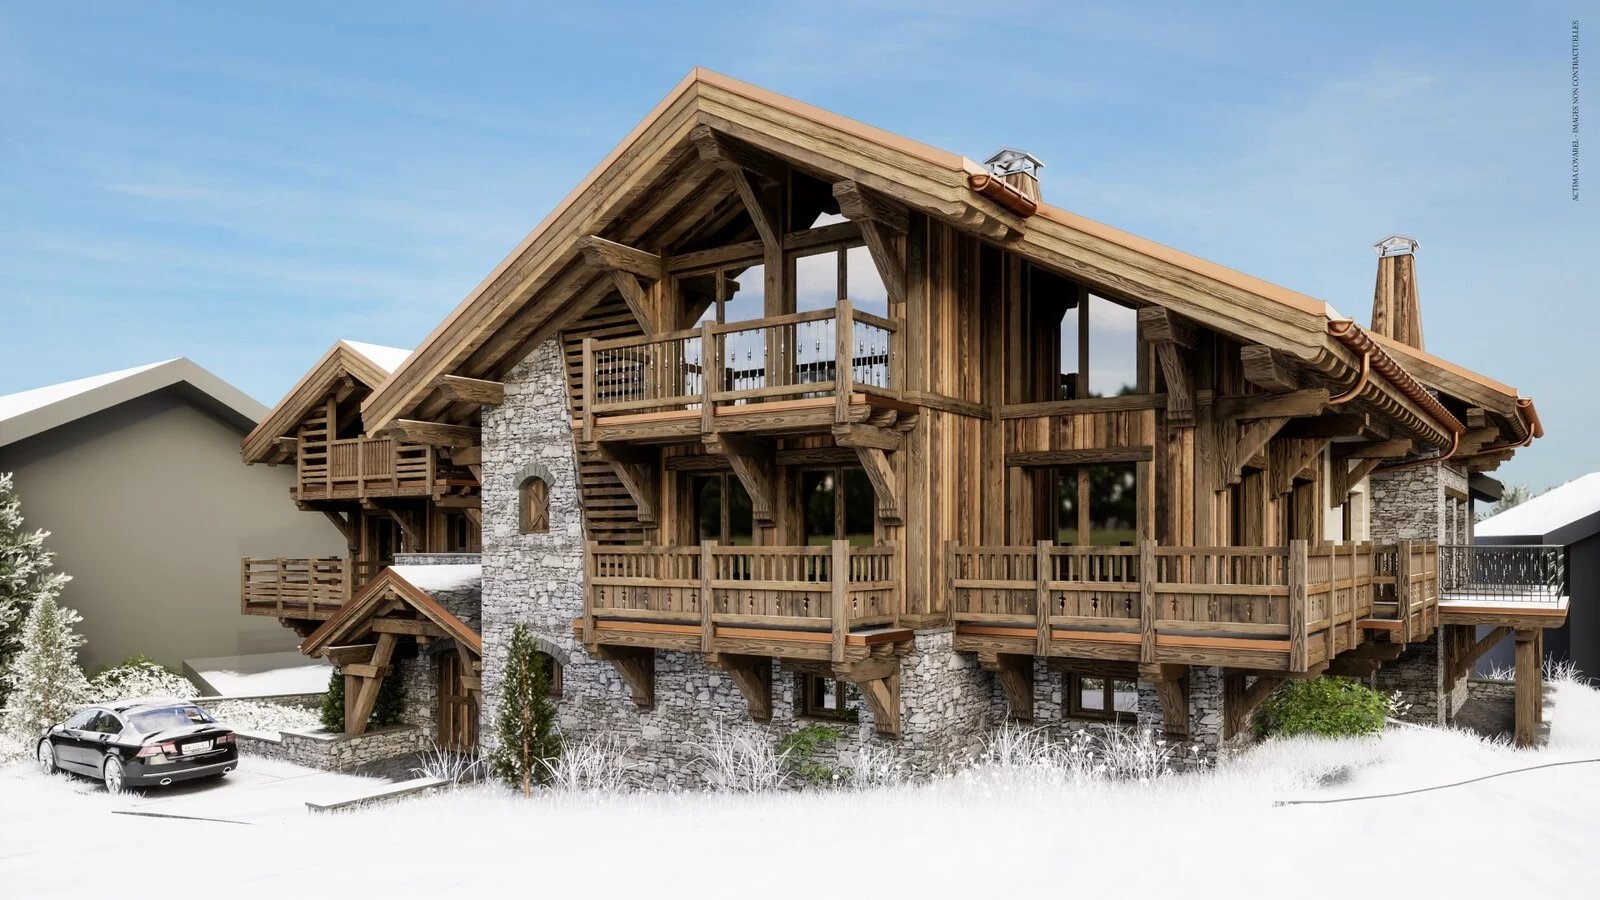 7-ROOM CHALET WITH SWIMMING POOL - MADE-TO-MEASURE LAYOUT